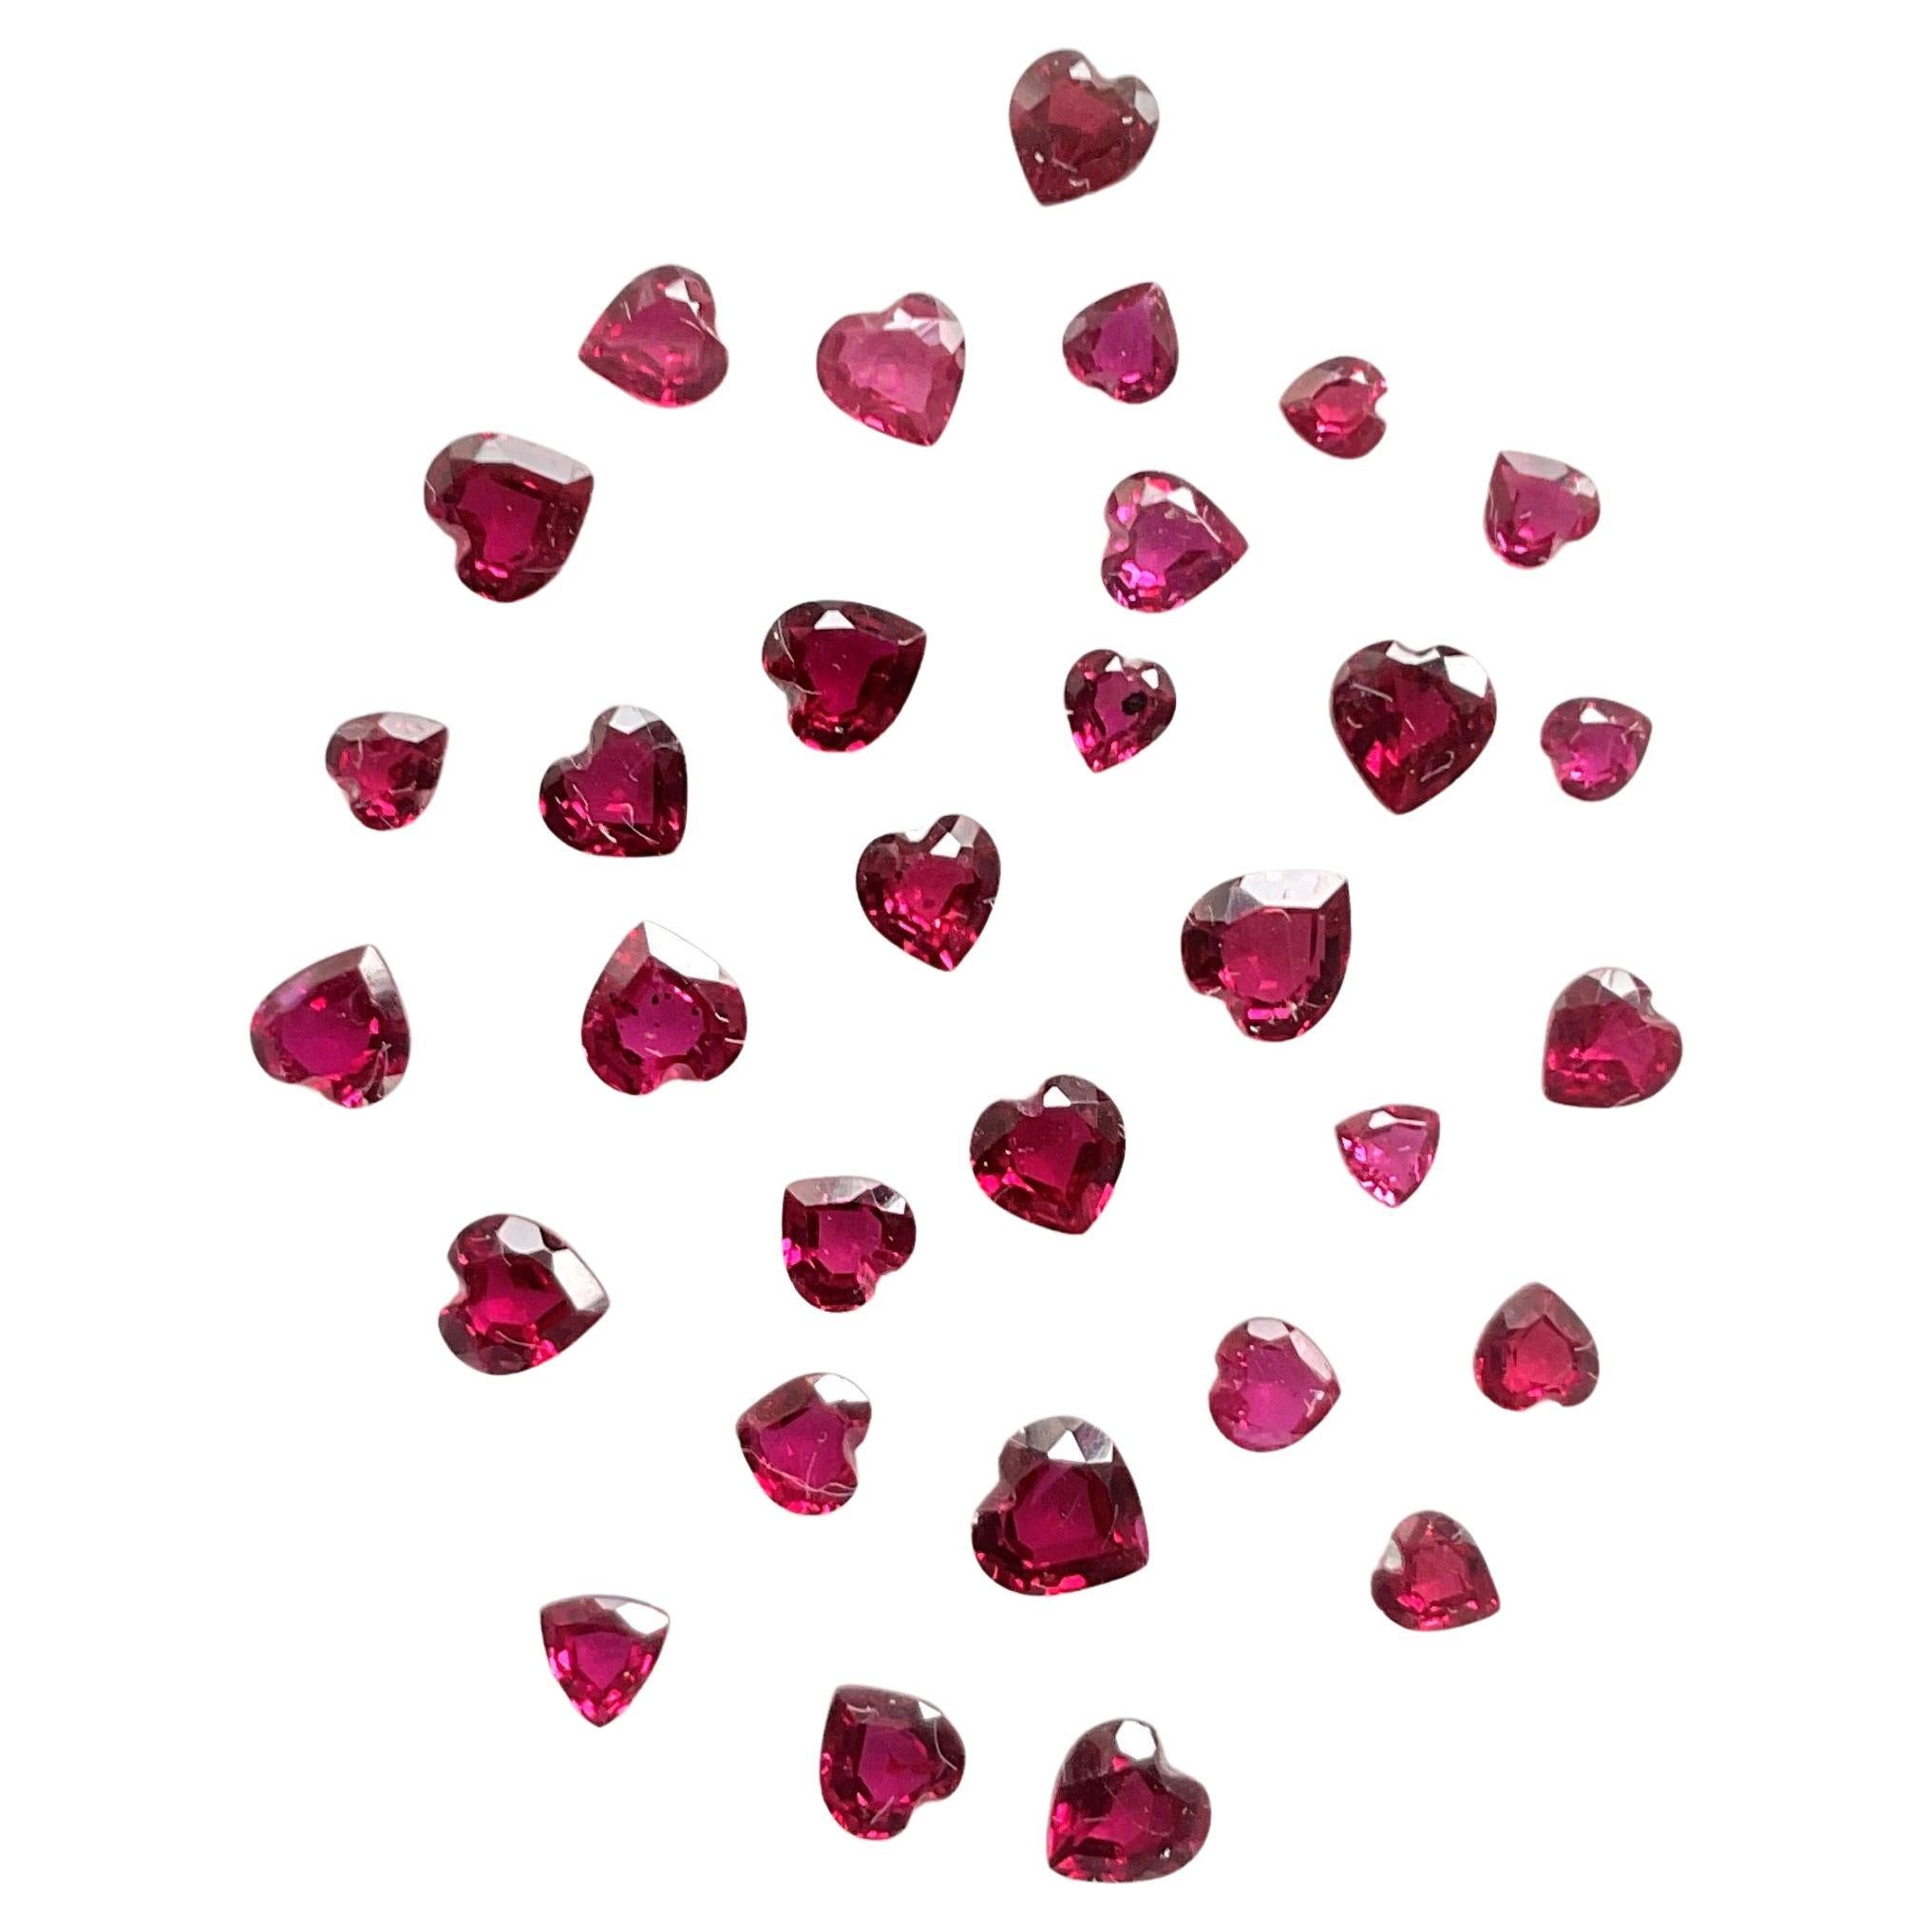 3.59 Carats Mozambique Ruby Top Quality Heart Cut stone No Heat Natural Gemstone For Sale